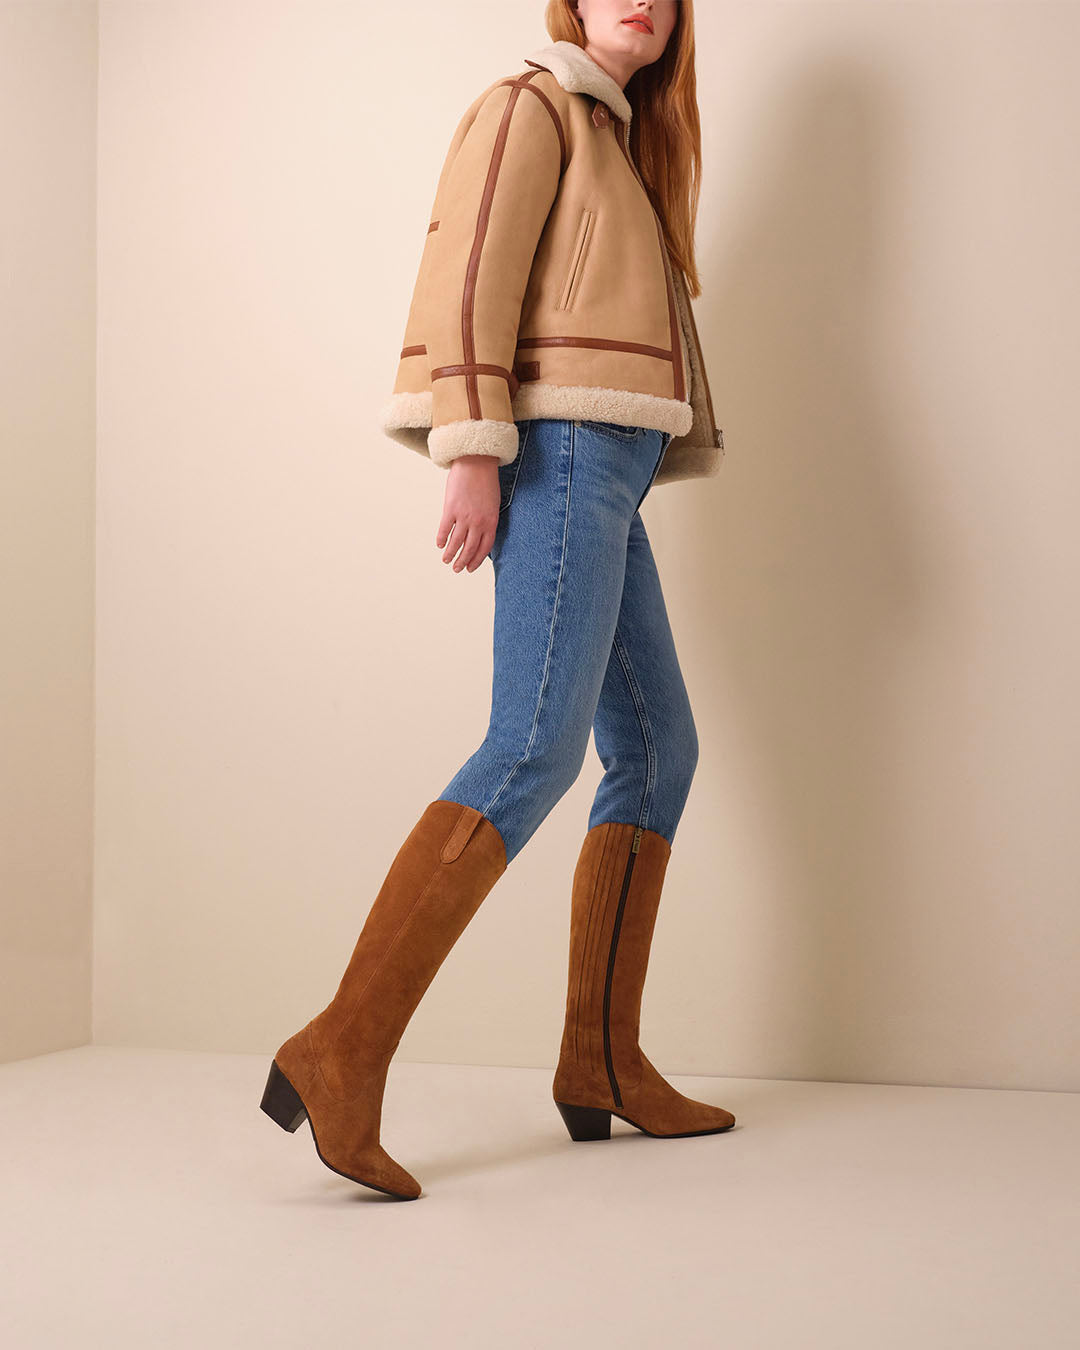 woman wearing knee high narrow calf cowboy style tan suede heeled boots